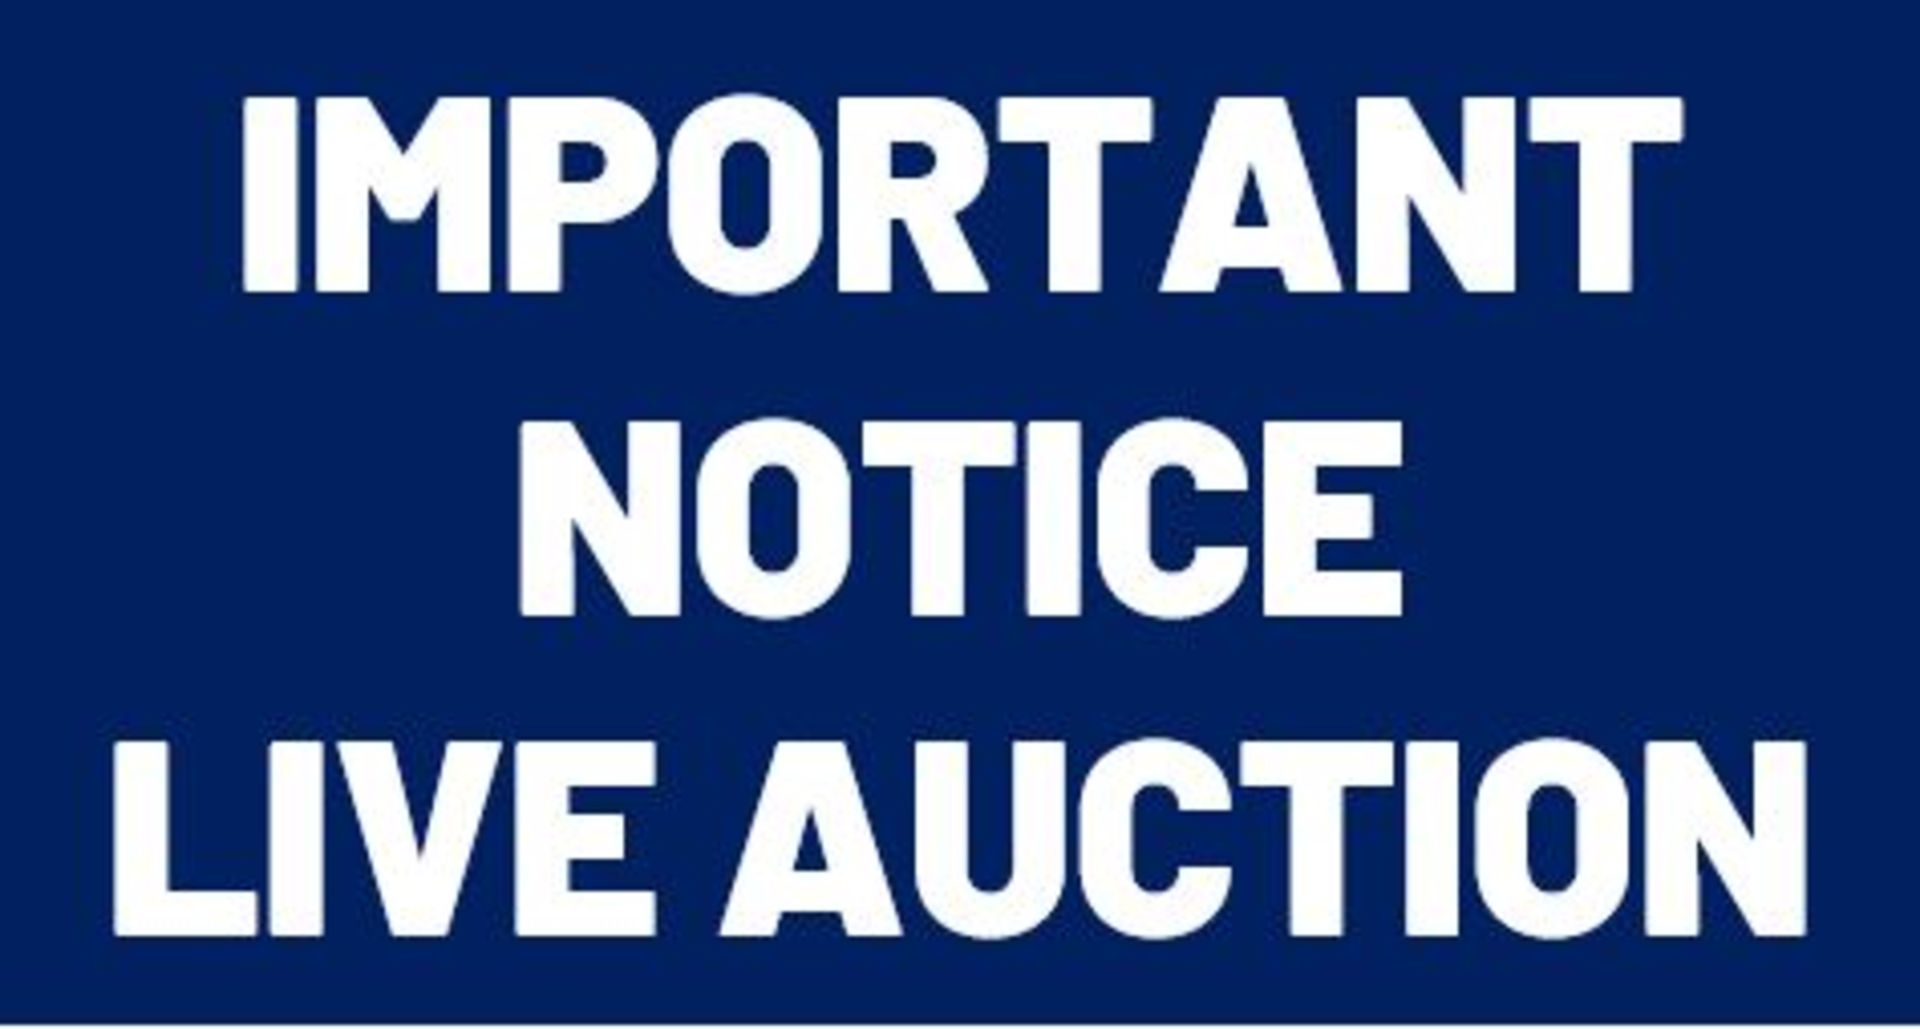 MPORTANT NOTICE – This is a live webcast auction (not a timed online auction).